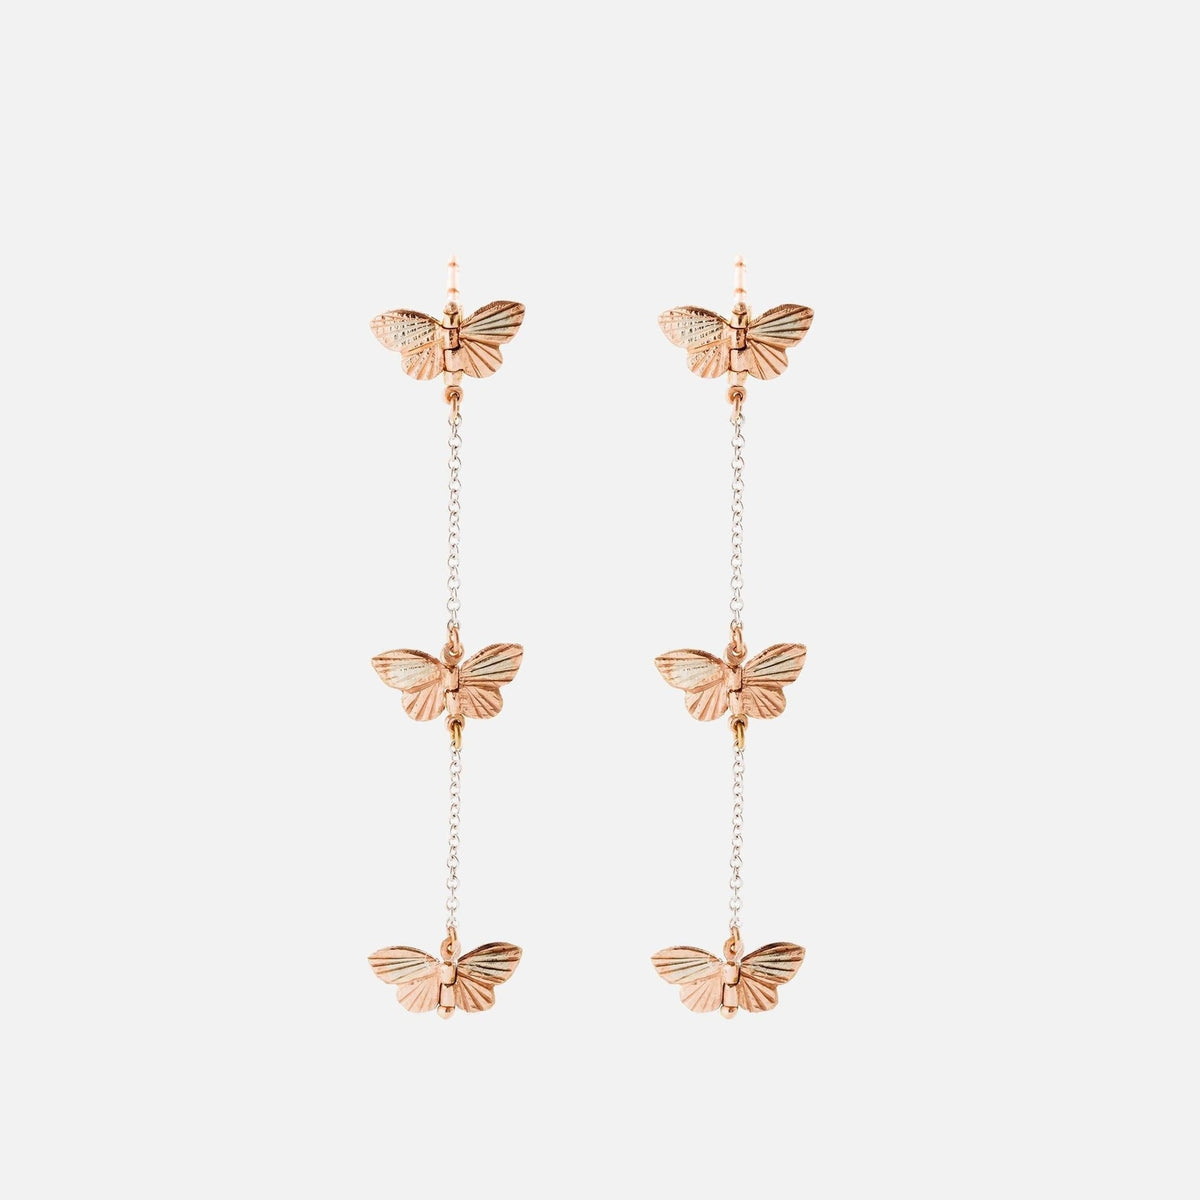 James Banks Design Butterfly Migration Chain Earrings 1